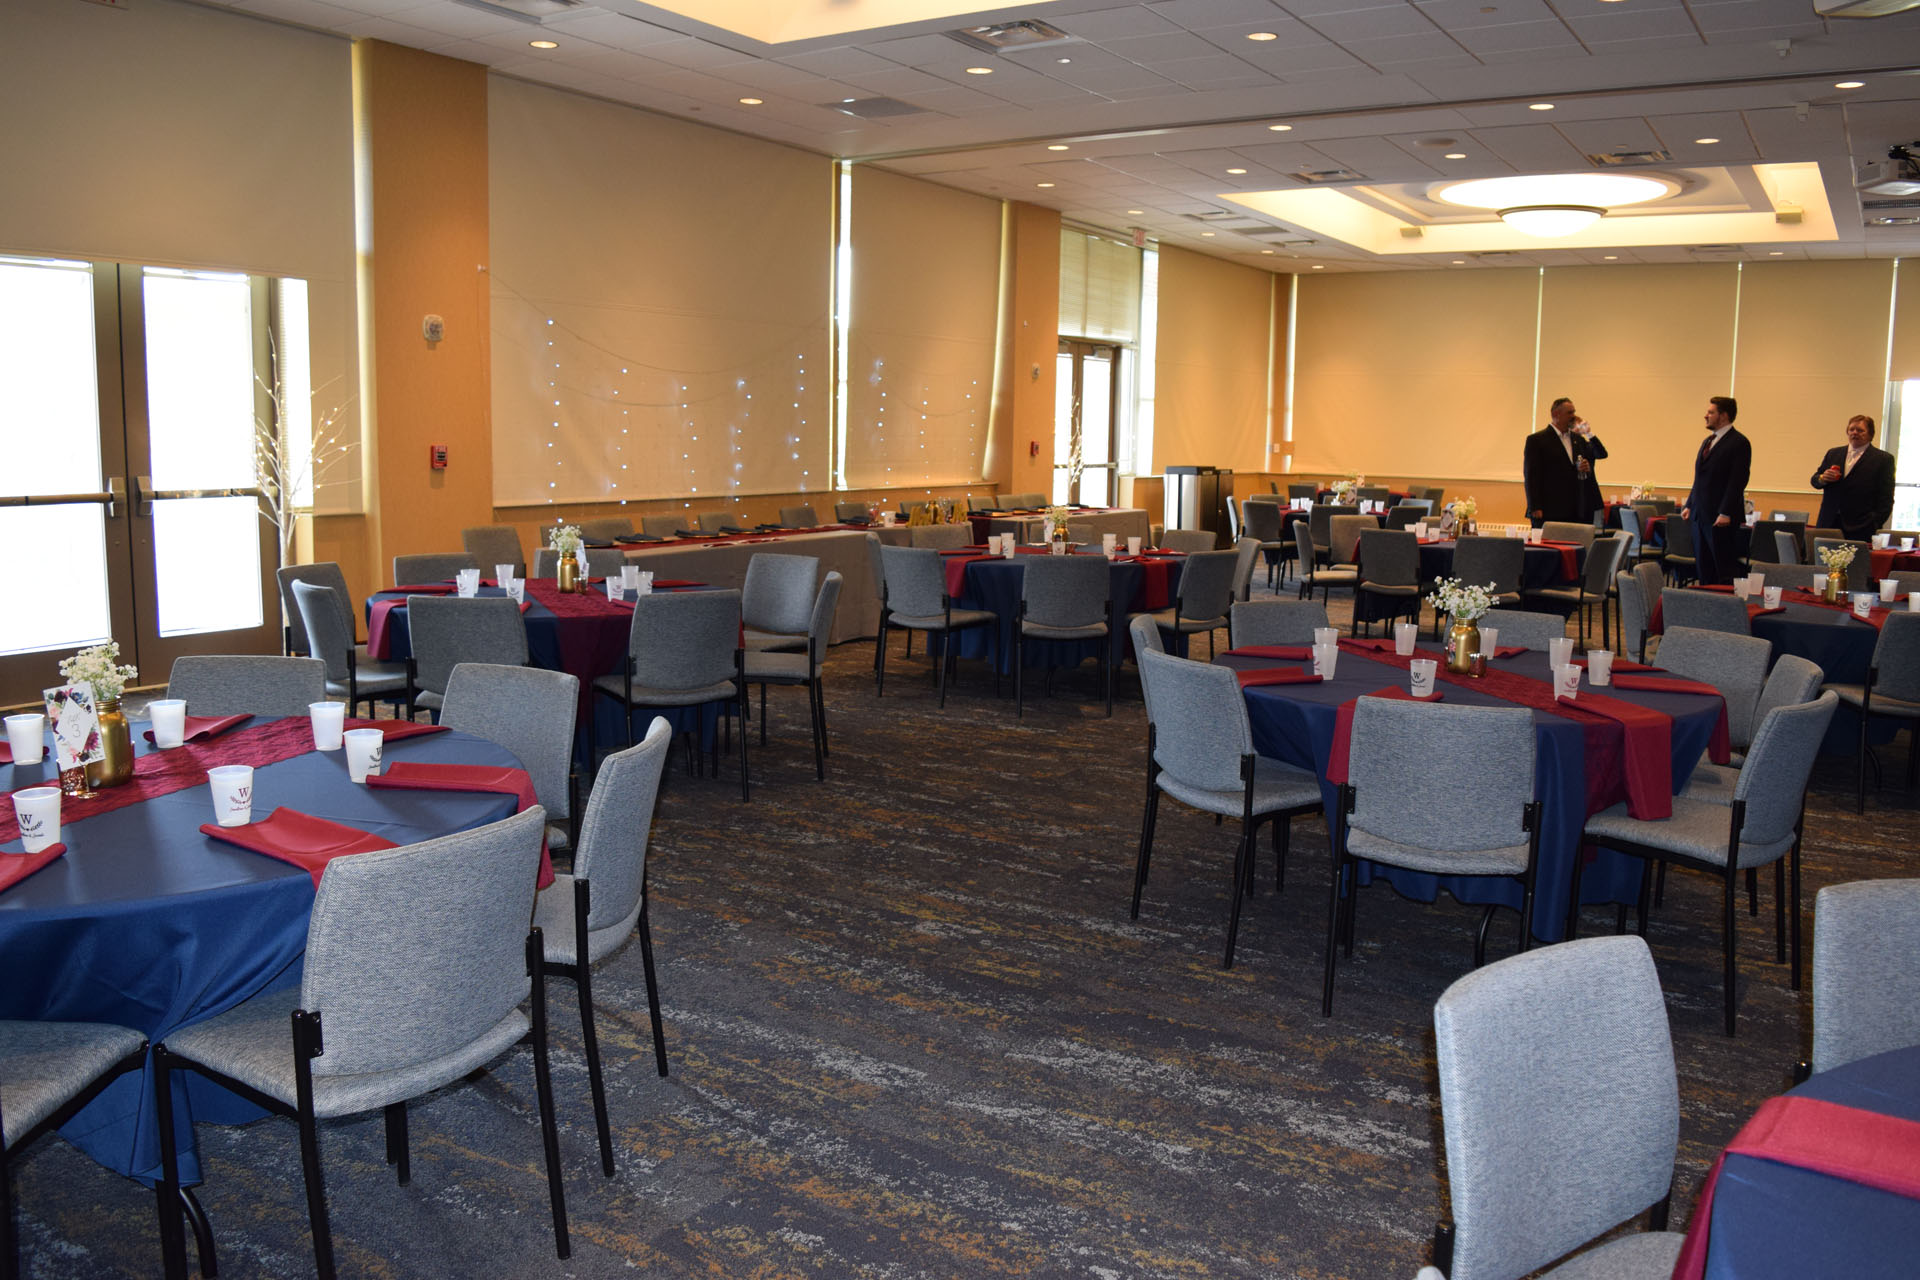 Chairs and Tables setup in the Anderson Center Community Meeting Room